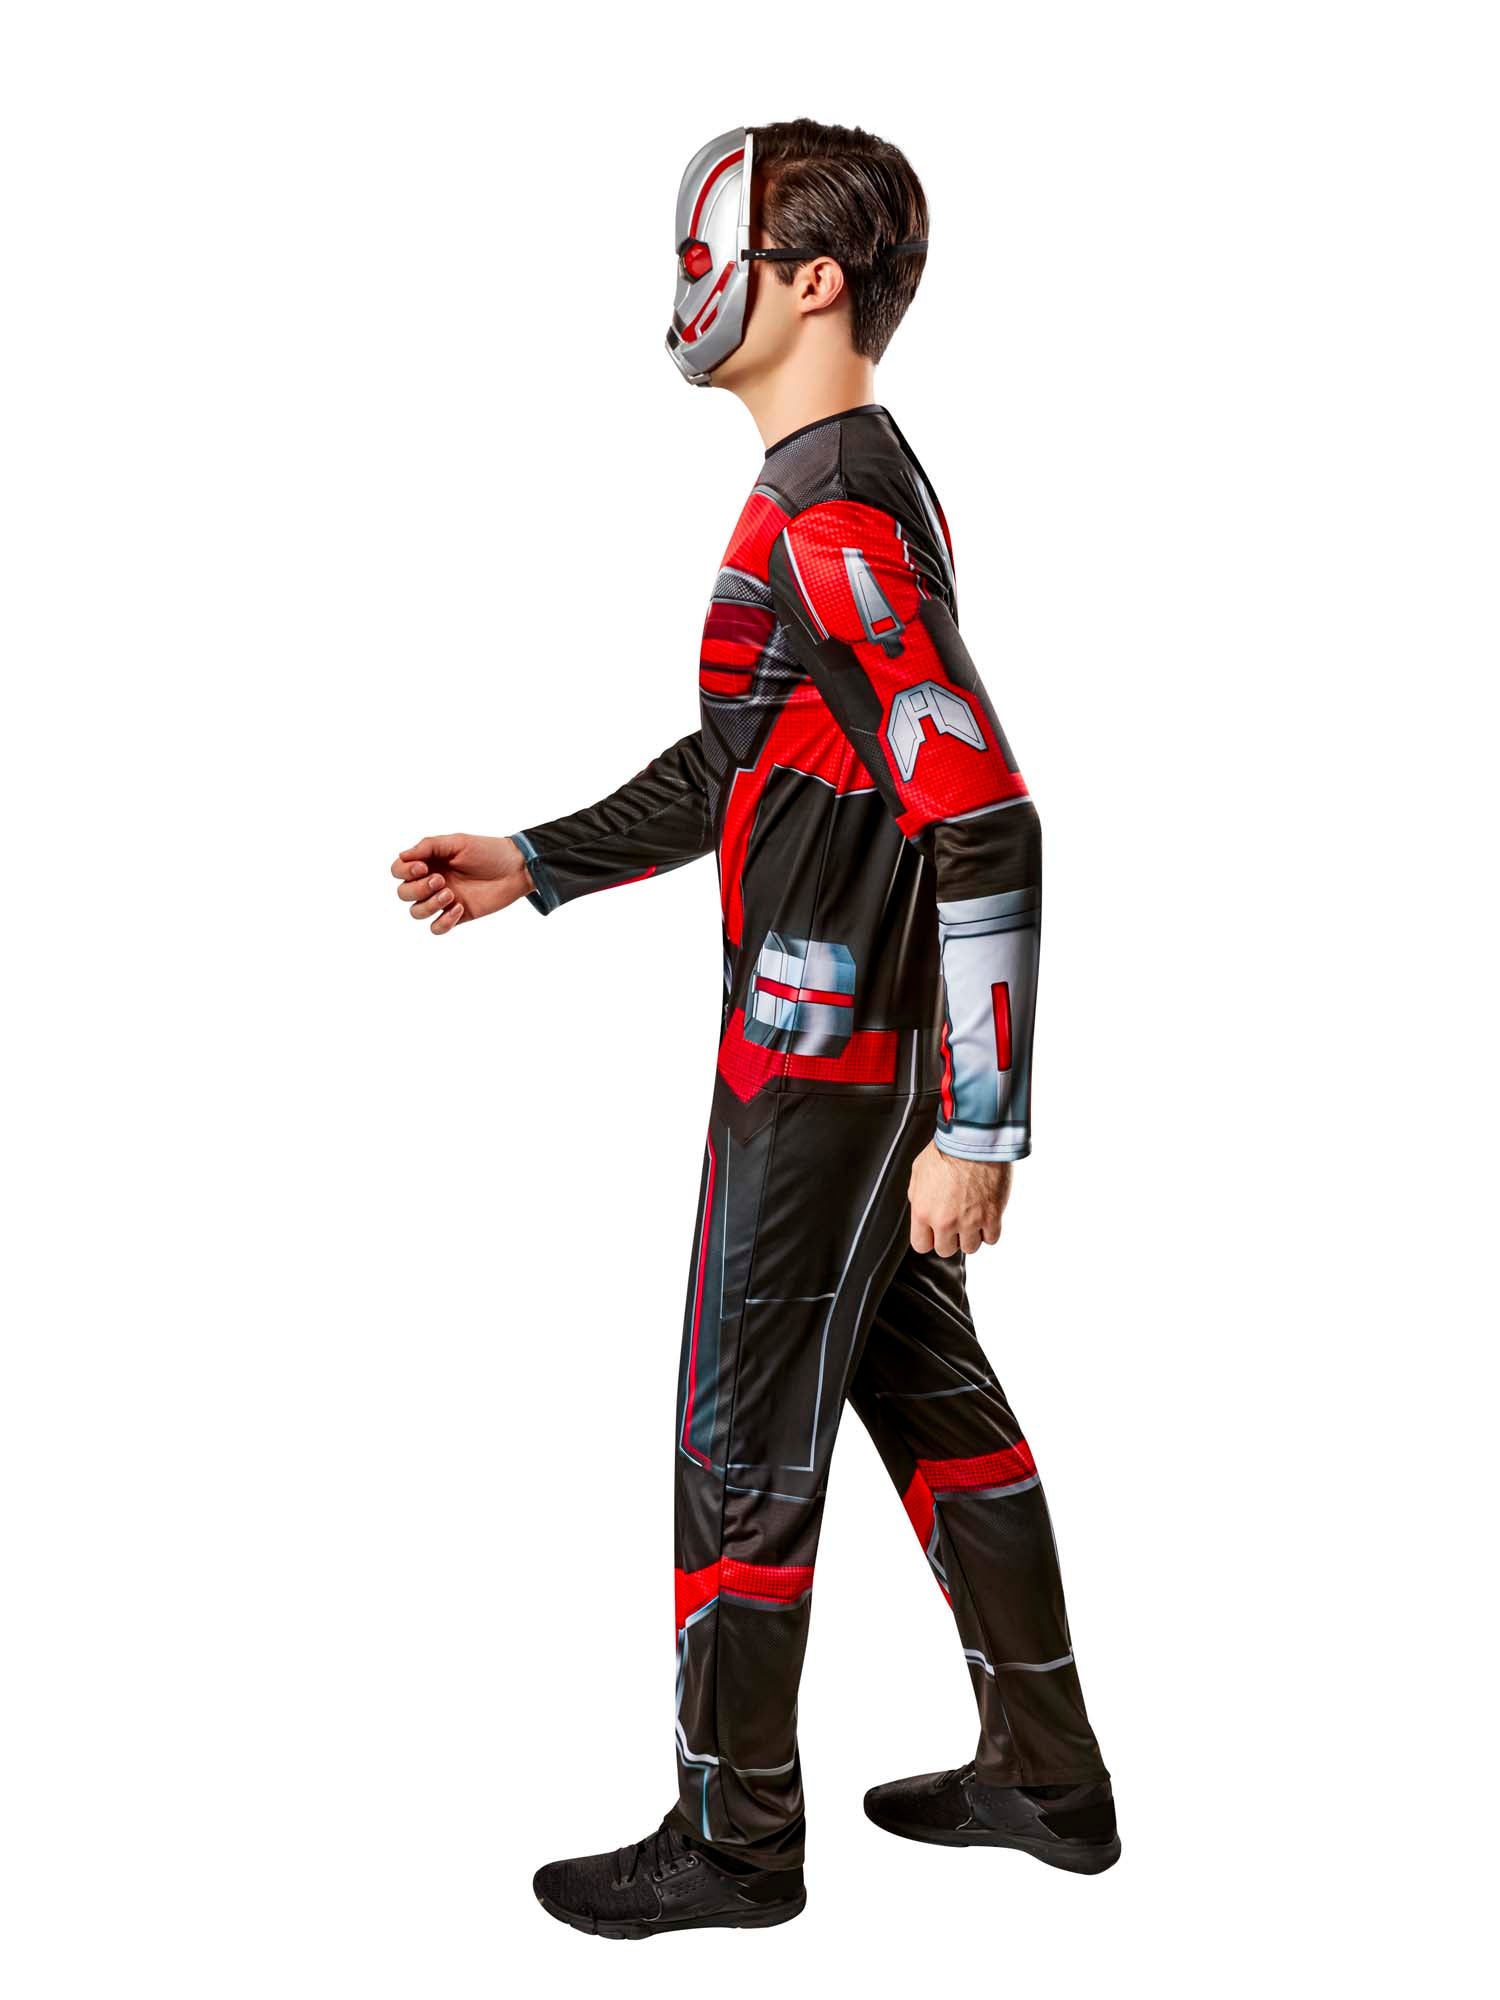 Ant-man, Ant-Man and the Wasp: Quantomania, Ant-Man Quantumania, Ant-Man and the Wasp: Quantomania, Marvel, Adult Costumes, Large, Back